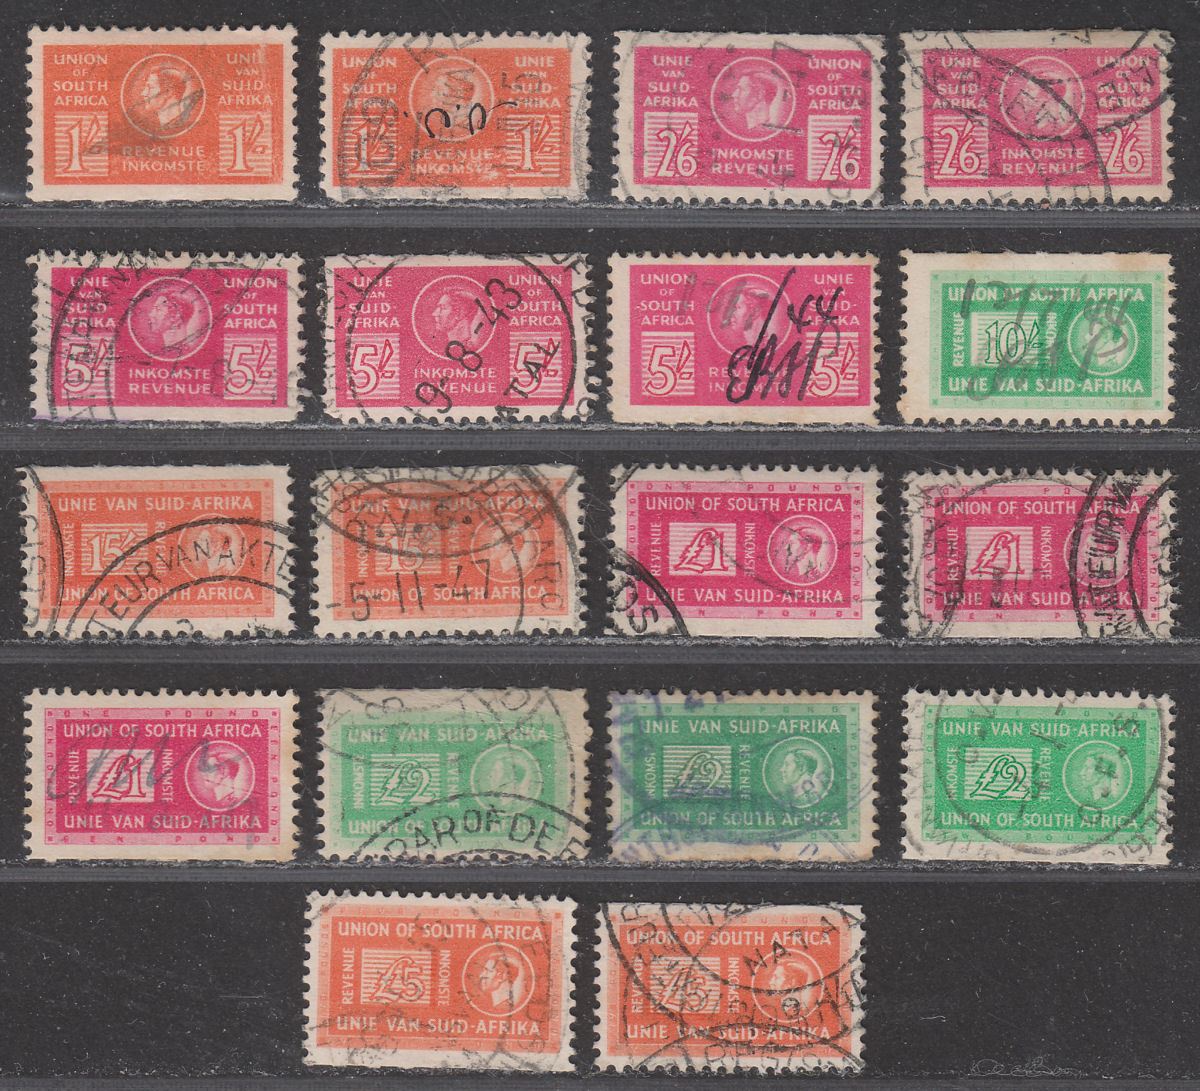 South Africa 1943 KGVI Revenue Reduced Size Part Set to £5 Used Fiscal